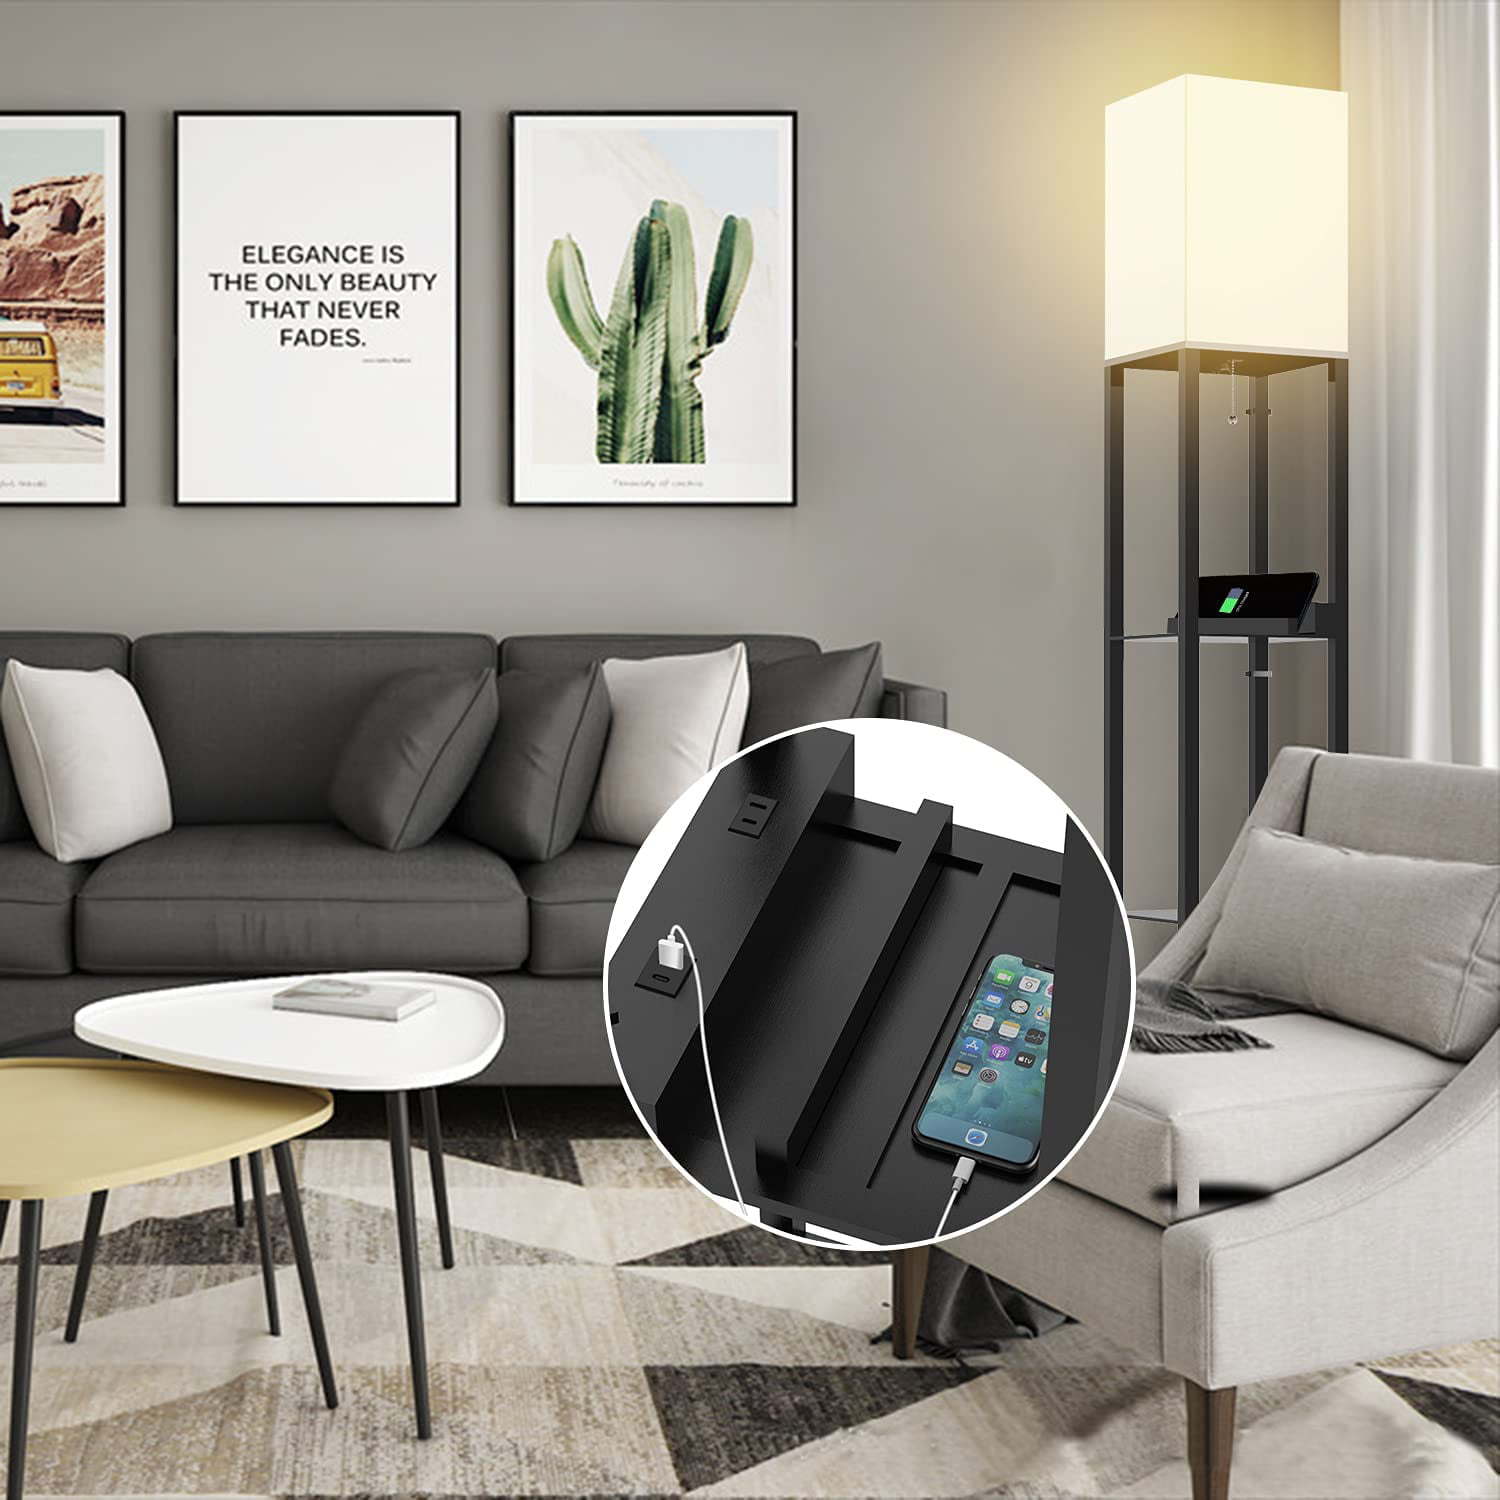 Floor Lamp with Shelf; Solid Wood Shelf Floor Lamp with 2 Charging Ports and 1 Power Outlet; Bedroom Floor Lamp; Living Room Lamp; Matte Black floor lamp with built-in shelves and USB charging ports, shown charging multiple devices, with an inset close-up on the charging slot.